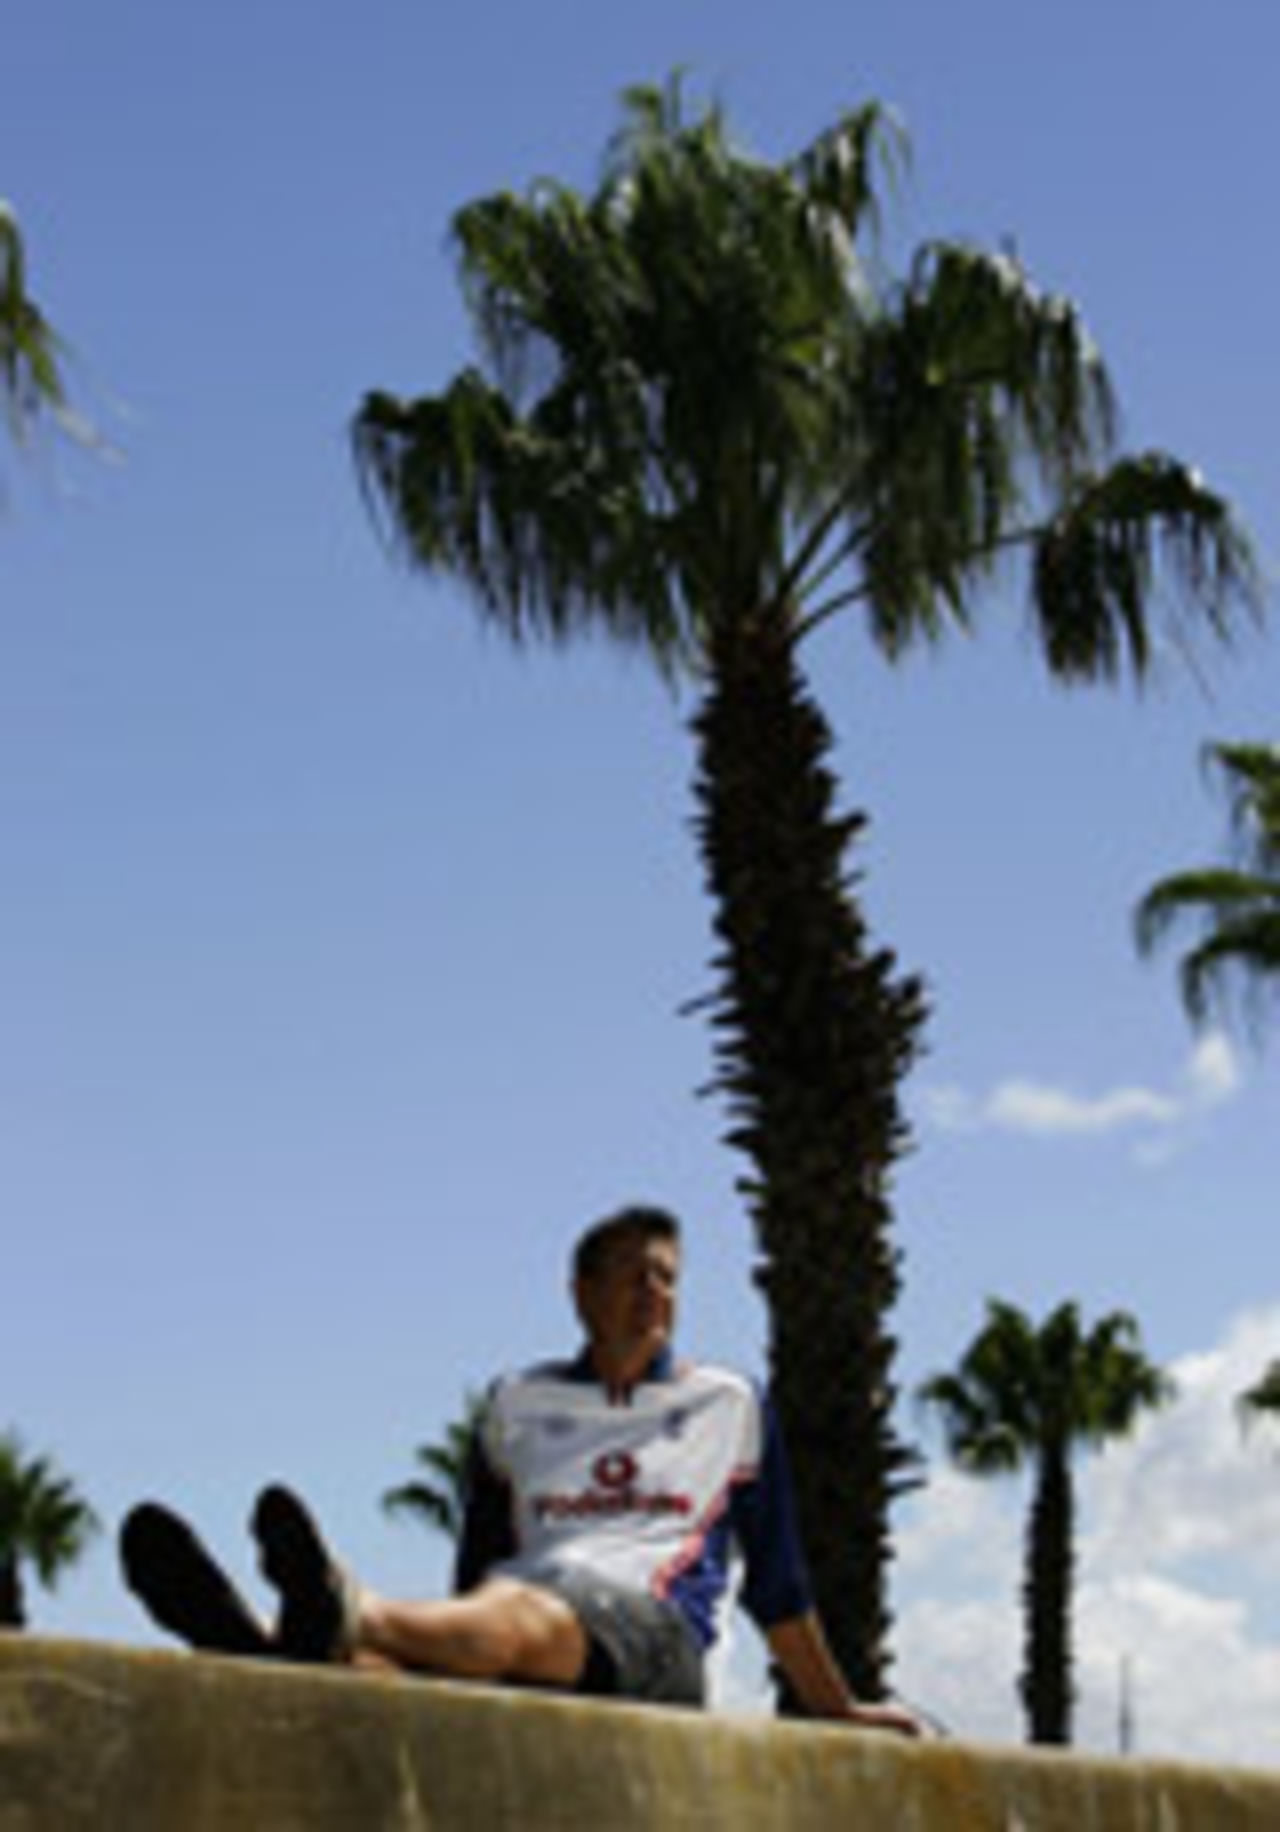 Ashley Giles under a tree at the V&A Waterfront in Cape Town, South Africa, December 31 2004